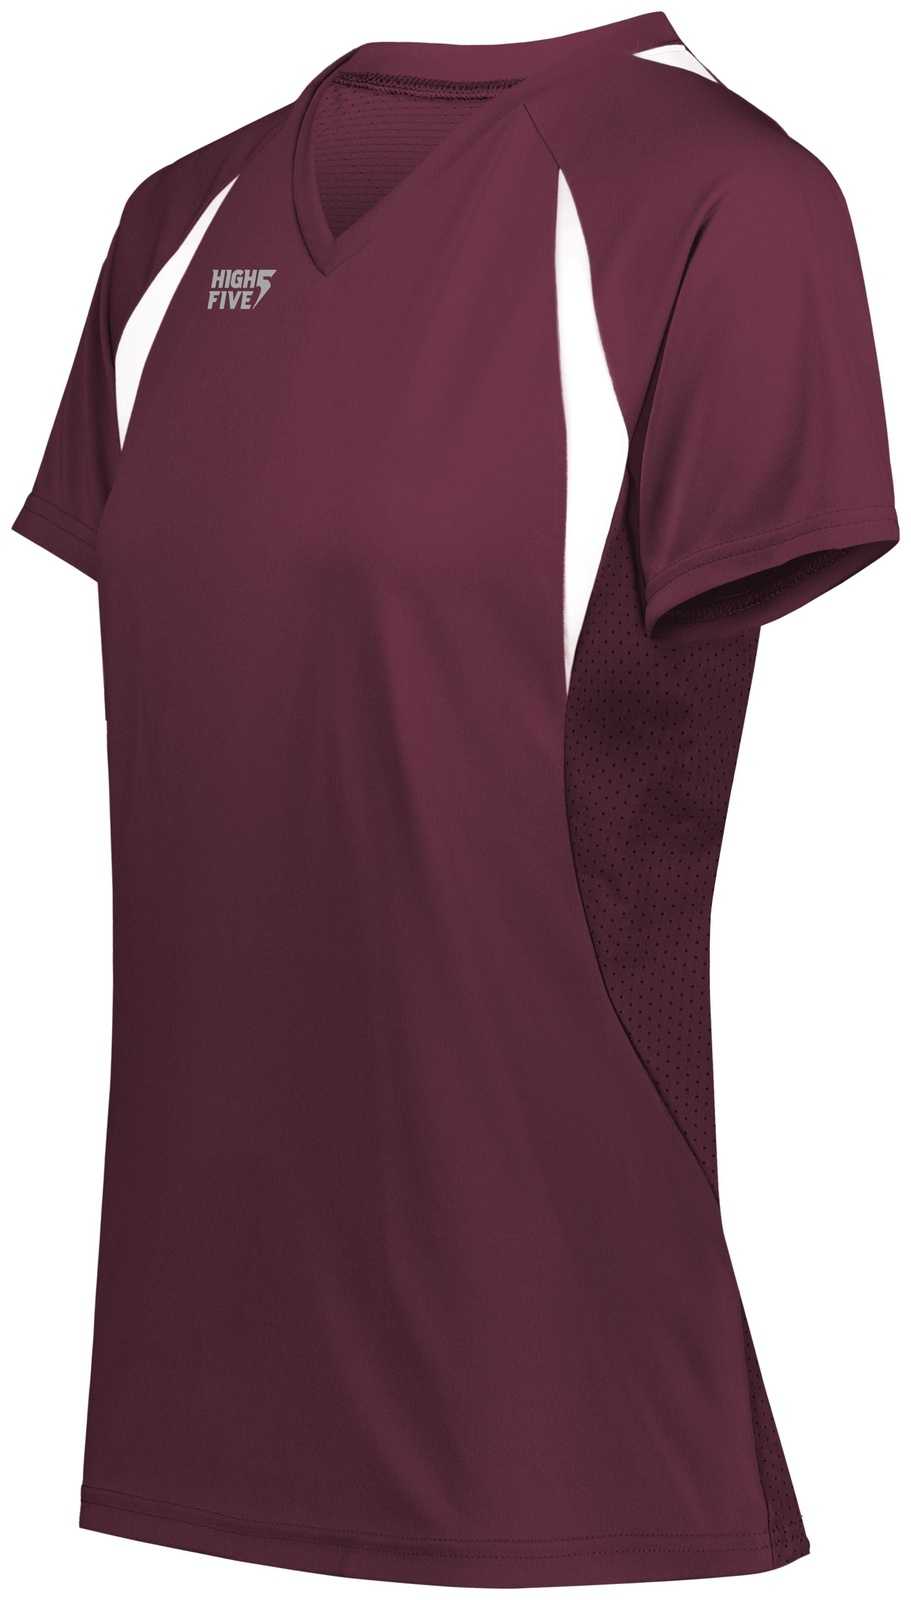 High Five 342233 Girls Color Cross Jersey - Maroon White - HIT a Double